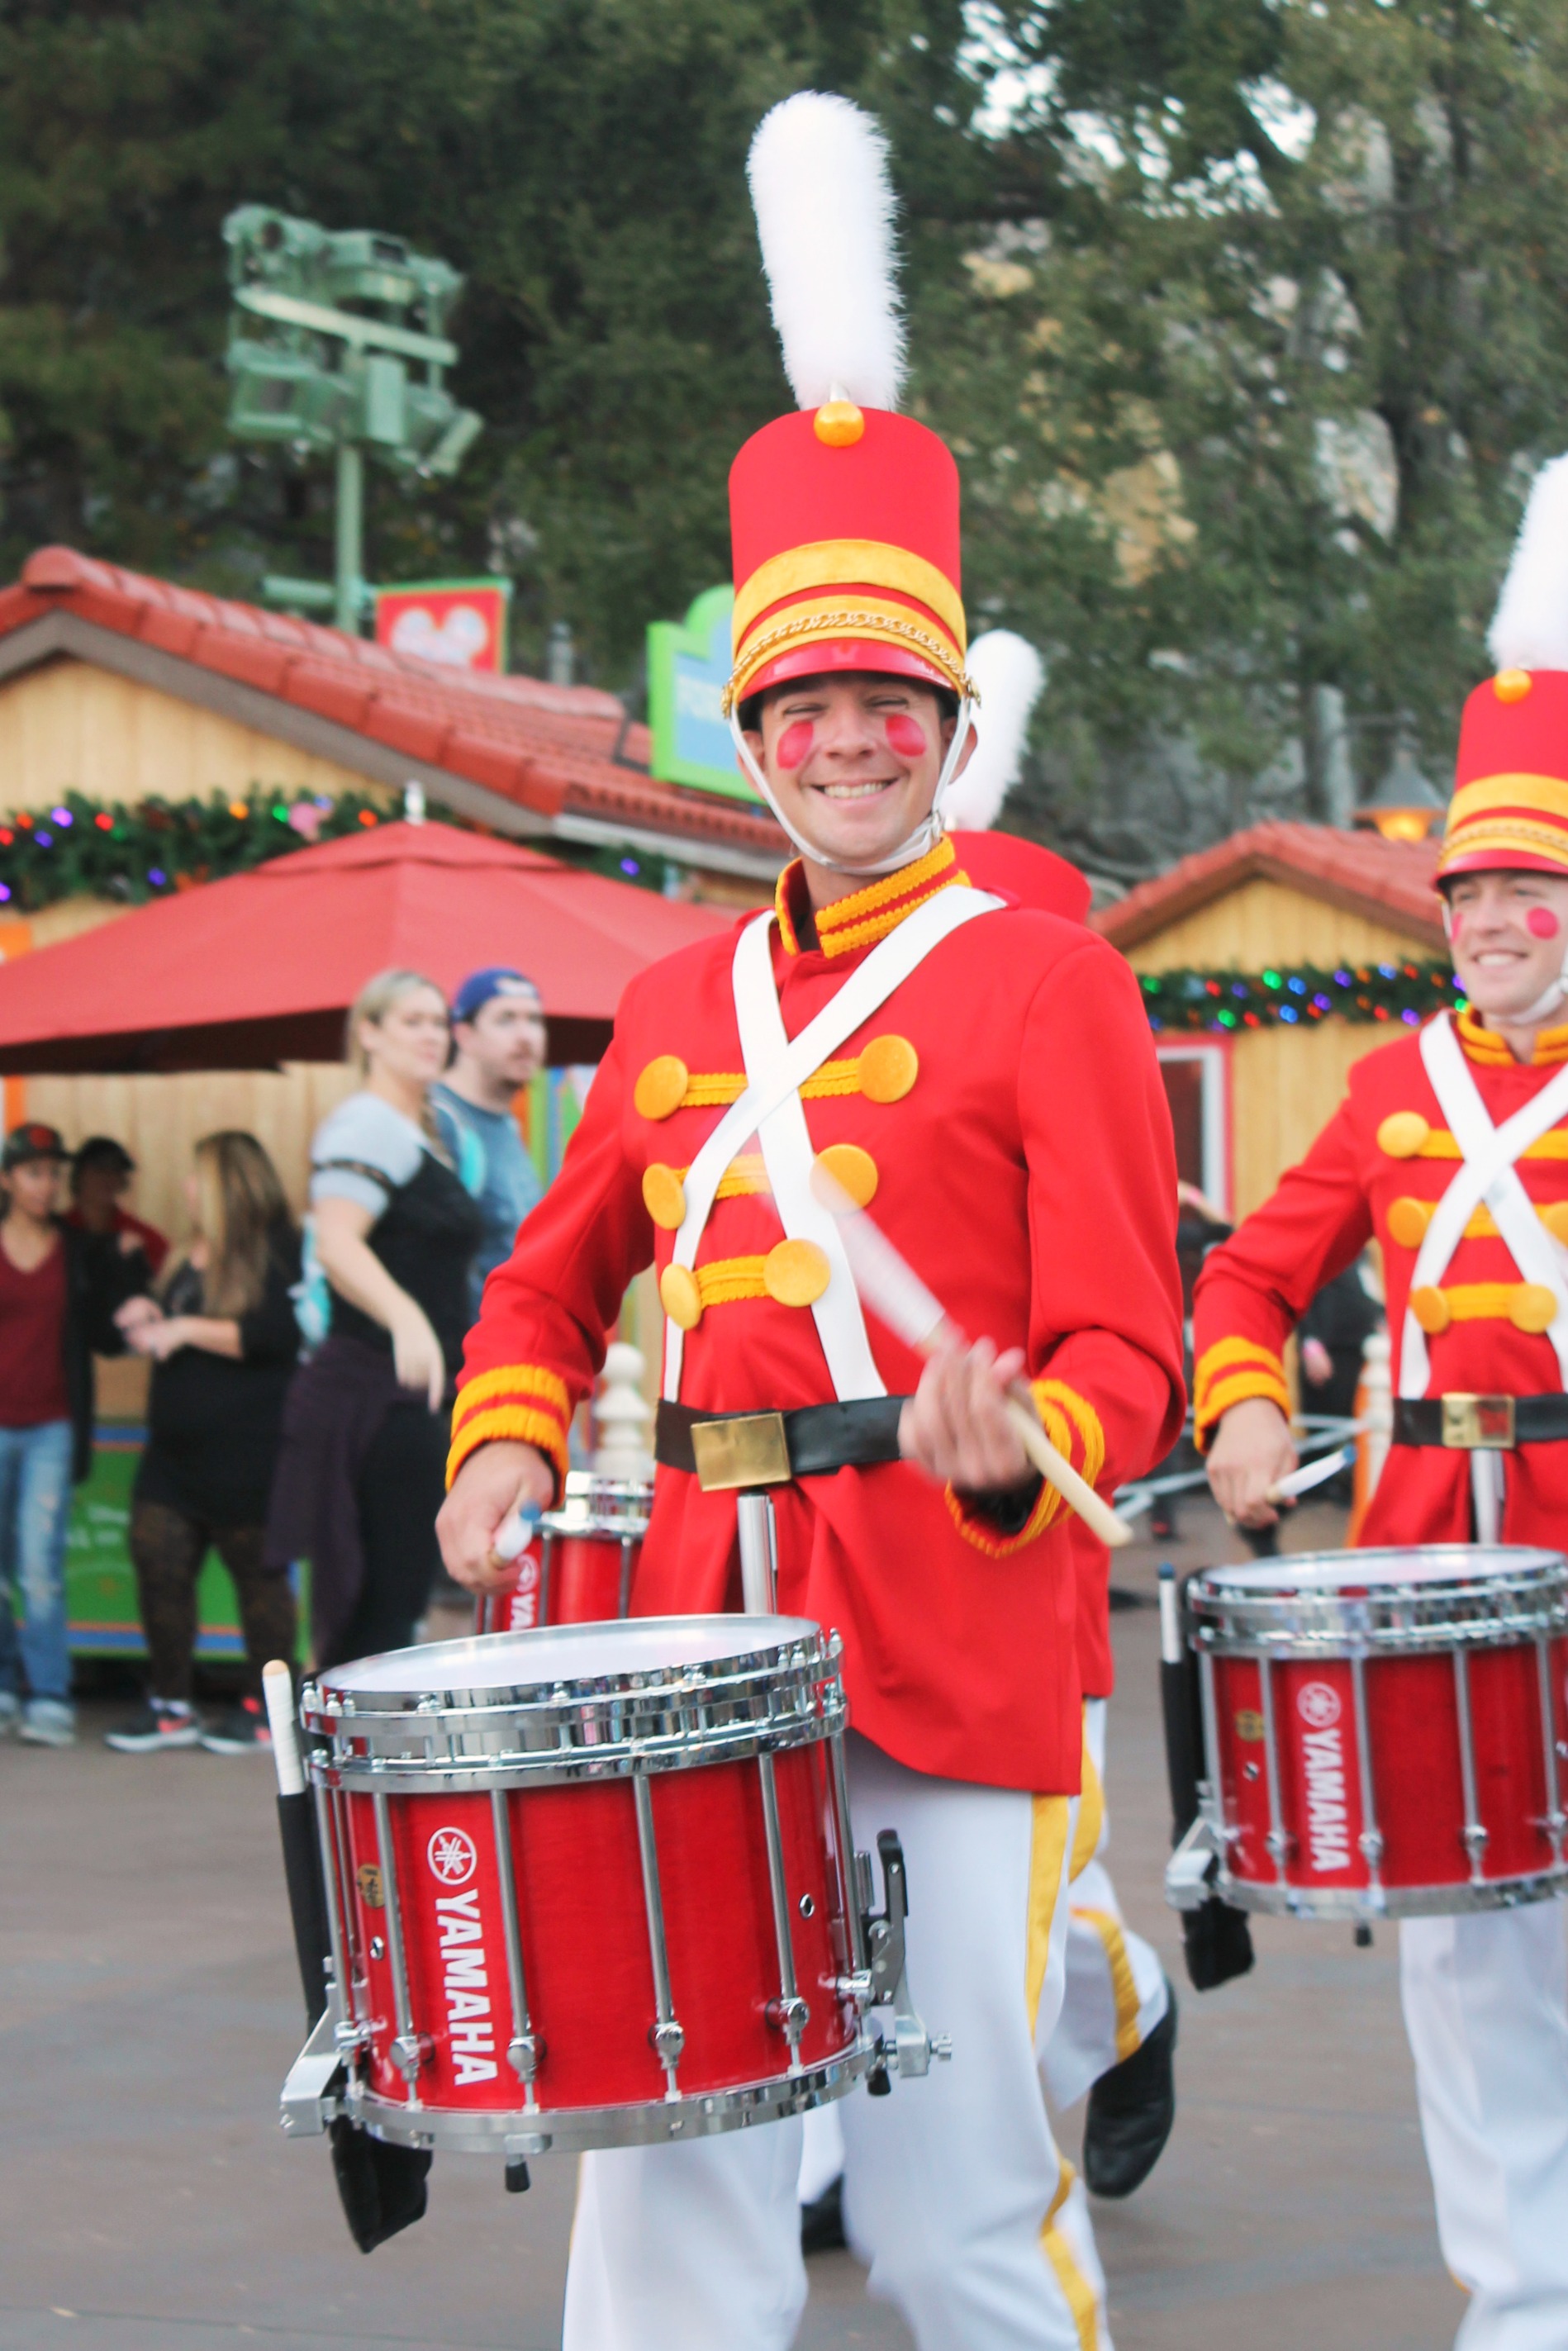 The new Festival of Holidays at the Disneyland Resort celebrates holiday festivities of diverse cultures with music, dance and craft-making, plus food at the Festive Foods Marketplace. 